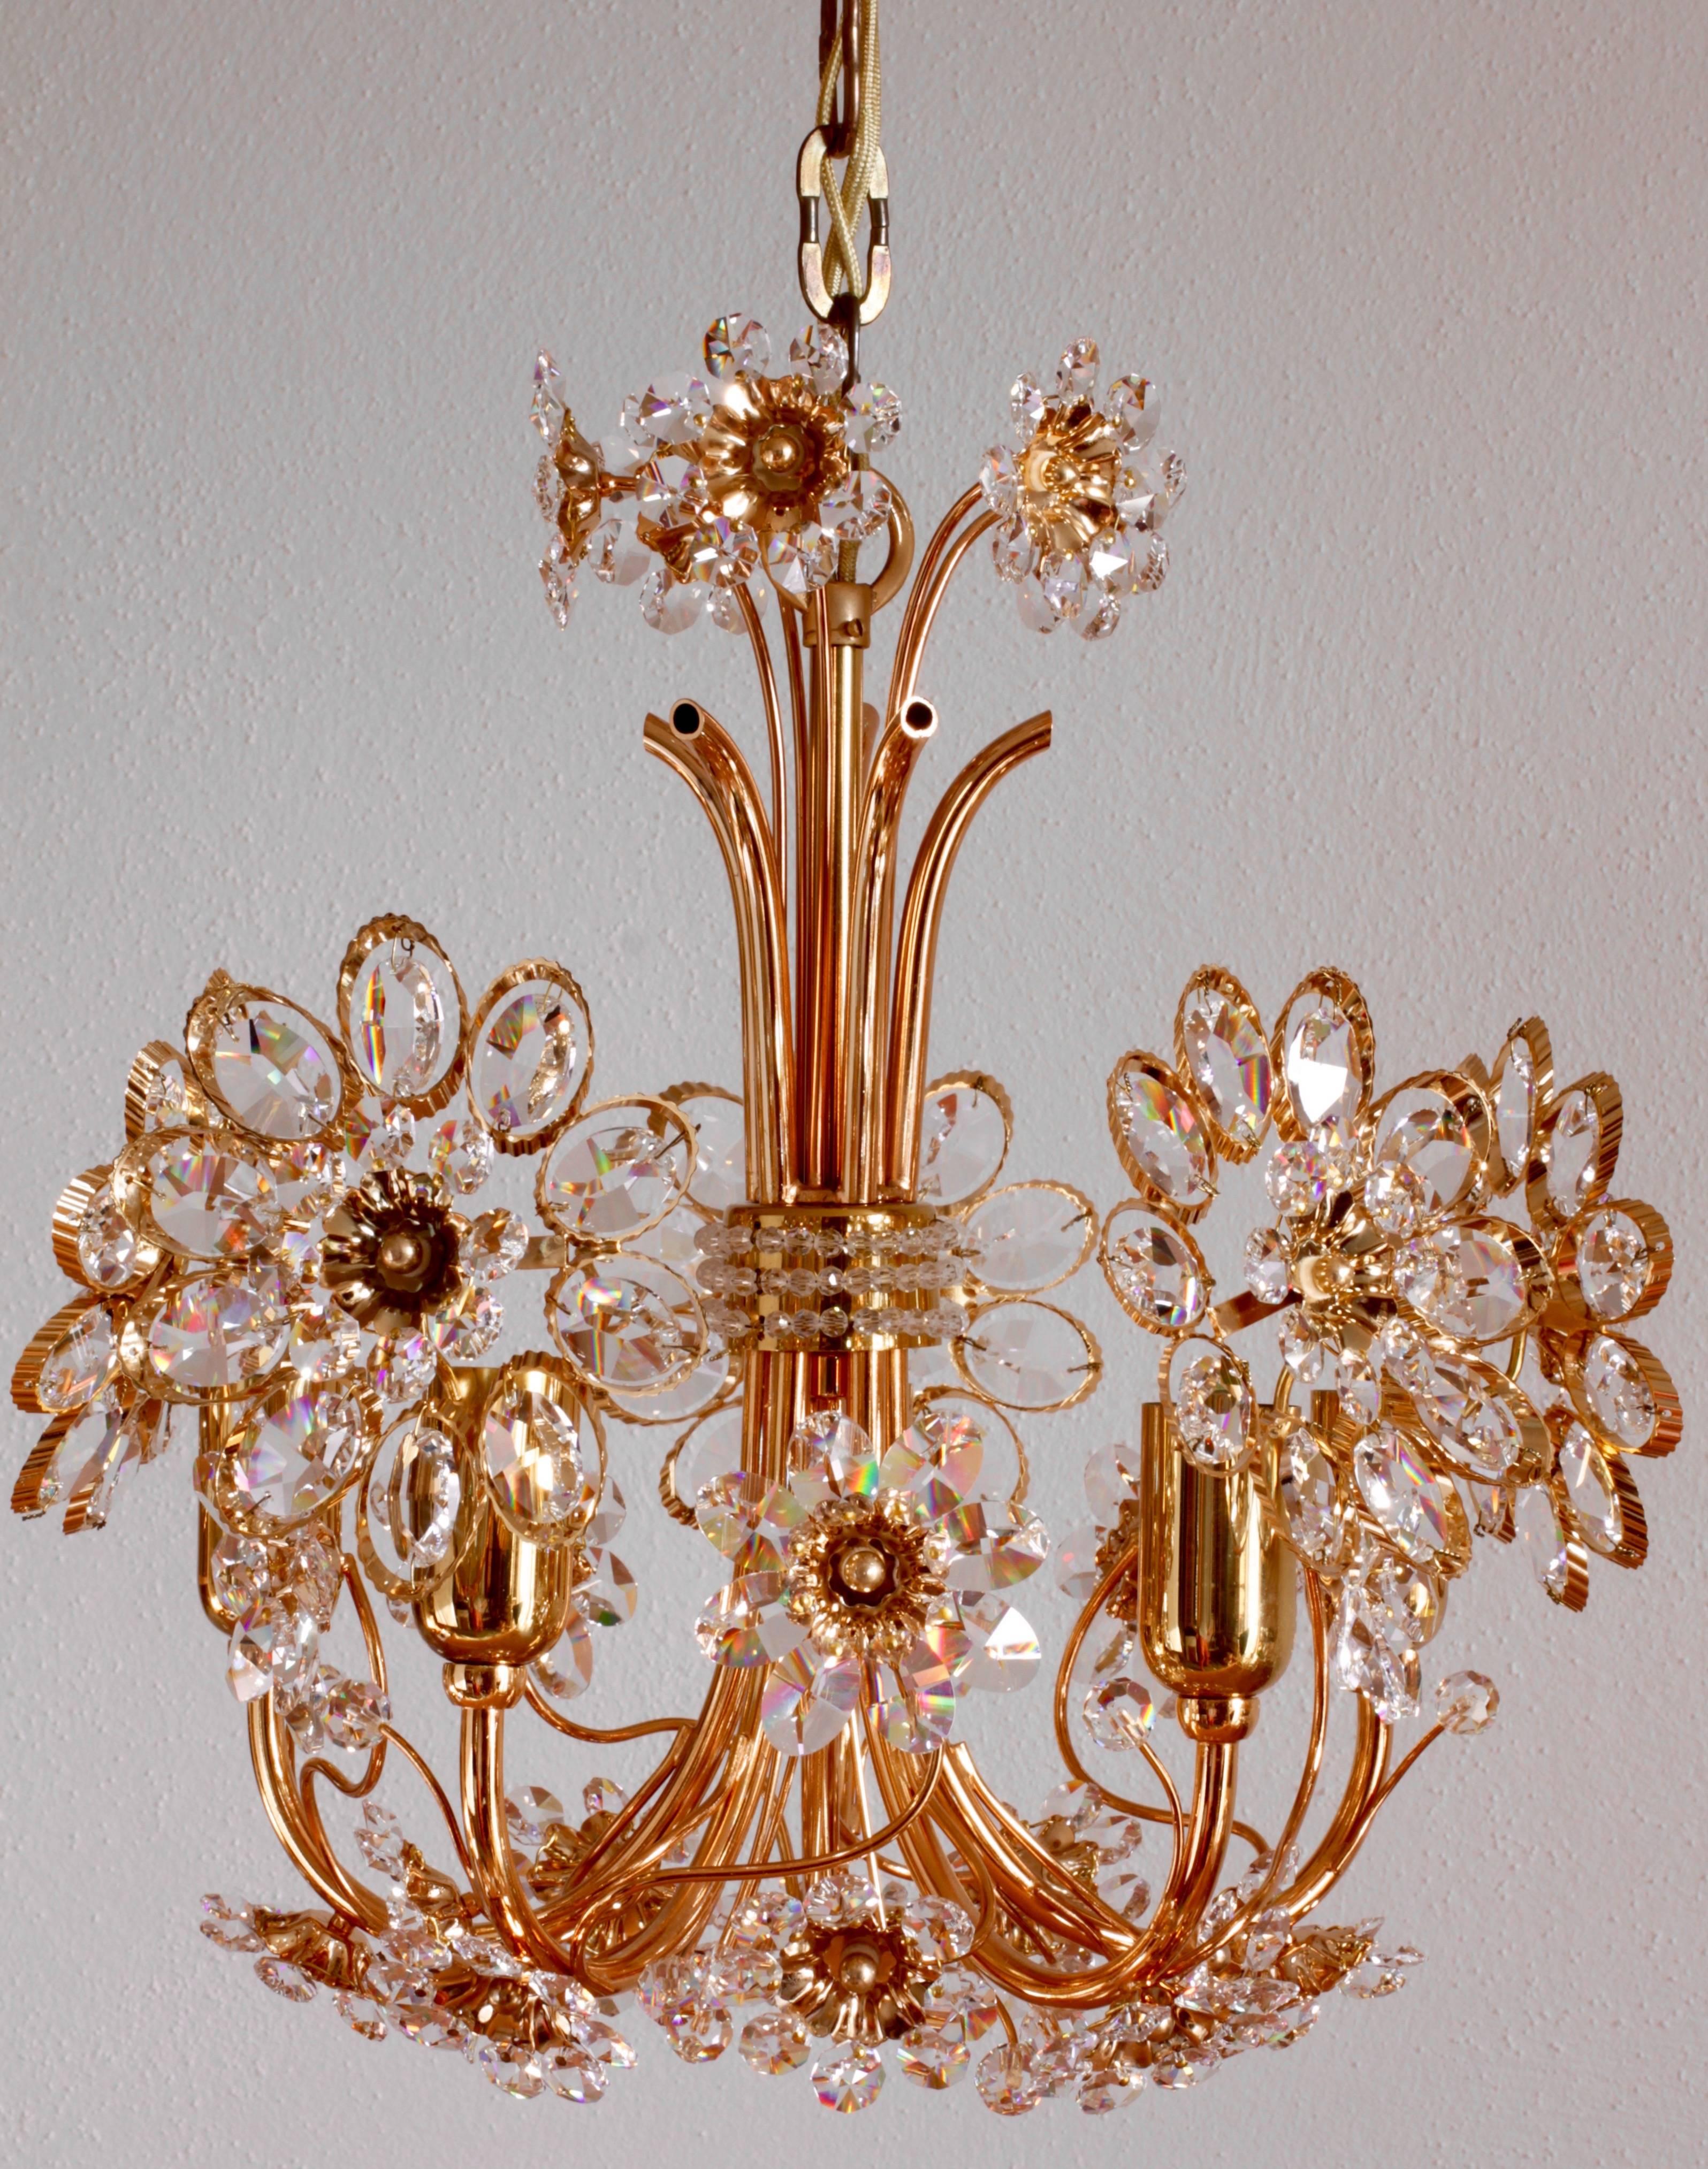 An absolutely stunning midcentury German gilt brass and cut crystal chandelier by Palwa, circa 1965-1975. Perfect for the Hollywood Regency style, there is no better combination than gold and crystal for the opulent, decadent and luxurious look of